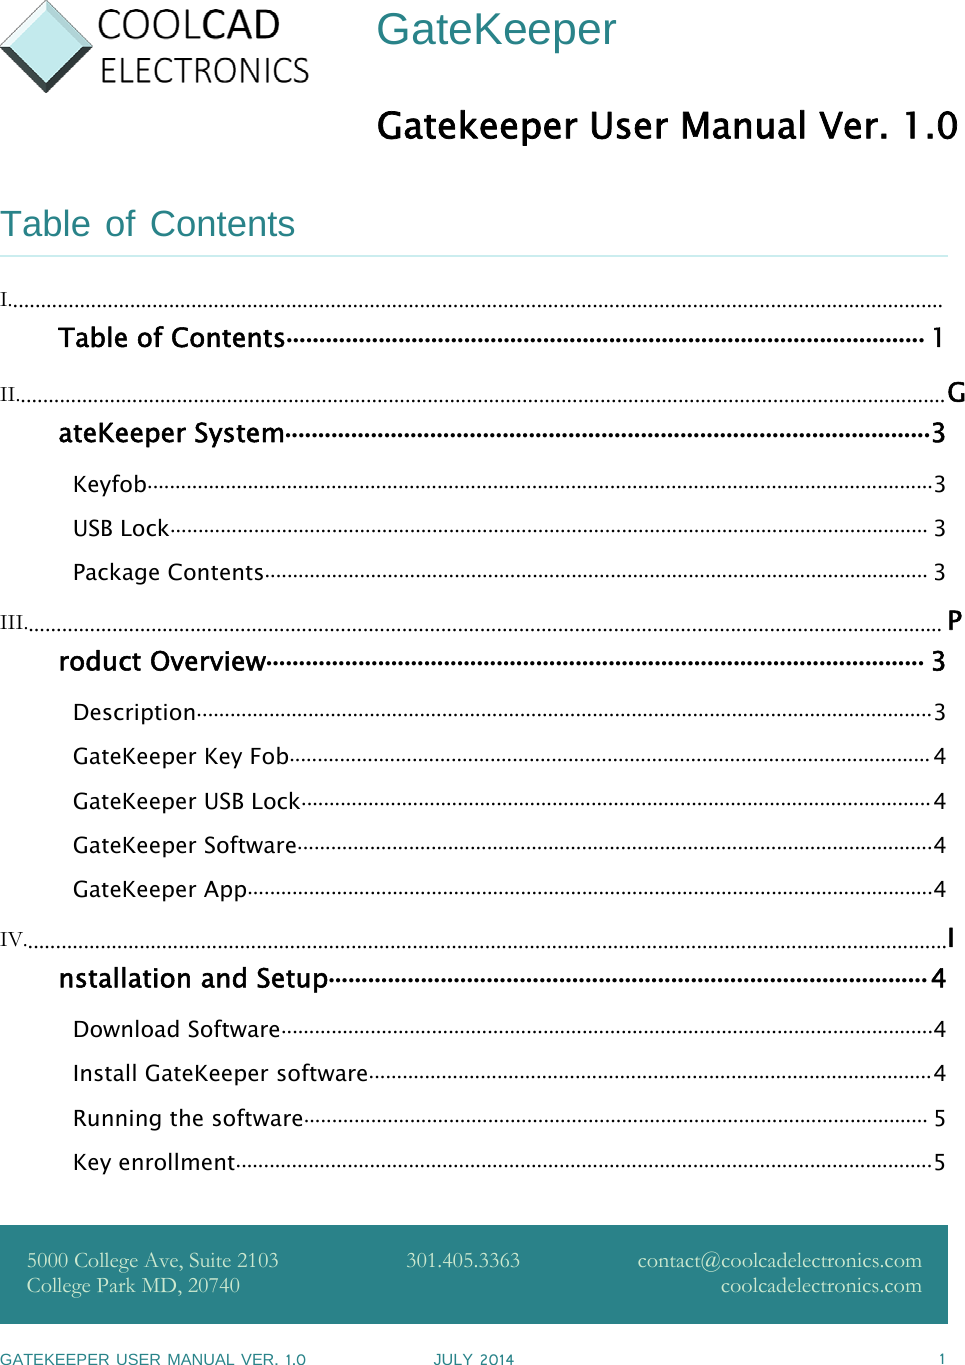 GATEKEEPER USER MANUAL VER.1.0 JULY 2014 1GateKeeperGatekeeper User Manual Ver. 1.0Table of ContentsI........................................................................................................................................................................Table of Contents................................................................................................. 1II.......................................................................................................................................................................GateKeeper System..................................................................................................3Keyfob.............................................................................................................................................3USB Lock........................................................................................................................................ 3Package Contents....................................................................................................................... 3III..................................................................................................................................................................... Product Overview.................................................................................................... 3Description....................................................................................................................................3GateKeeper Key Fob...................................................................................................................4GateKeeper USB Lock.................................................................................................................4GateKeeper Software..................................................................................................................4GateKeeper App...........................................................................................................................4IV......................................................................................................................................................................Installation and Setup...........................................................................................4Download Software.....................................................................................................................4Install GateKeeper software.....................................................................................................4Running the software................................................................................................................ 5Key enrollment.............................................................................................................................55000 College Ave, Suite 2103College Park MD, 20740301.405.3363 contact@coolcadelectronics.comcoolcadelectronics.com